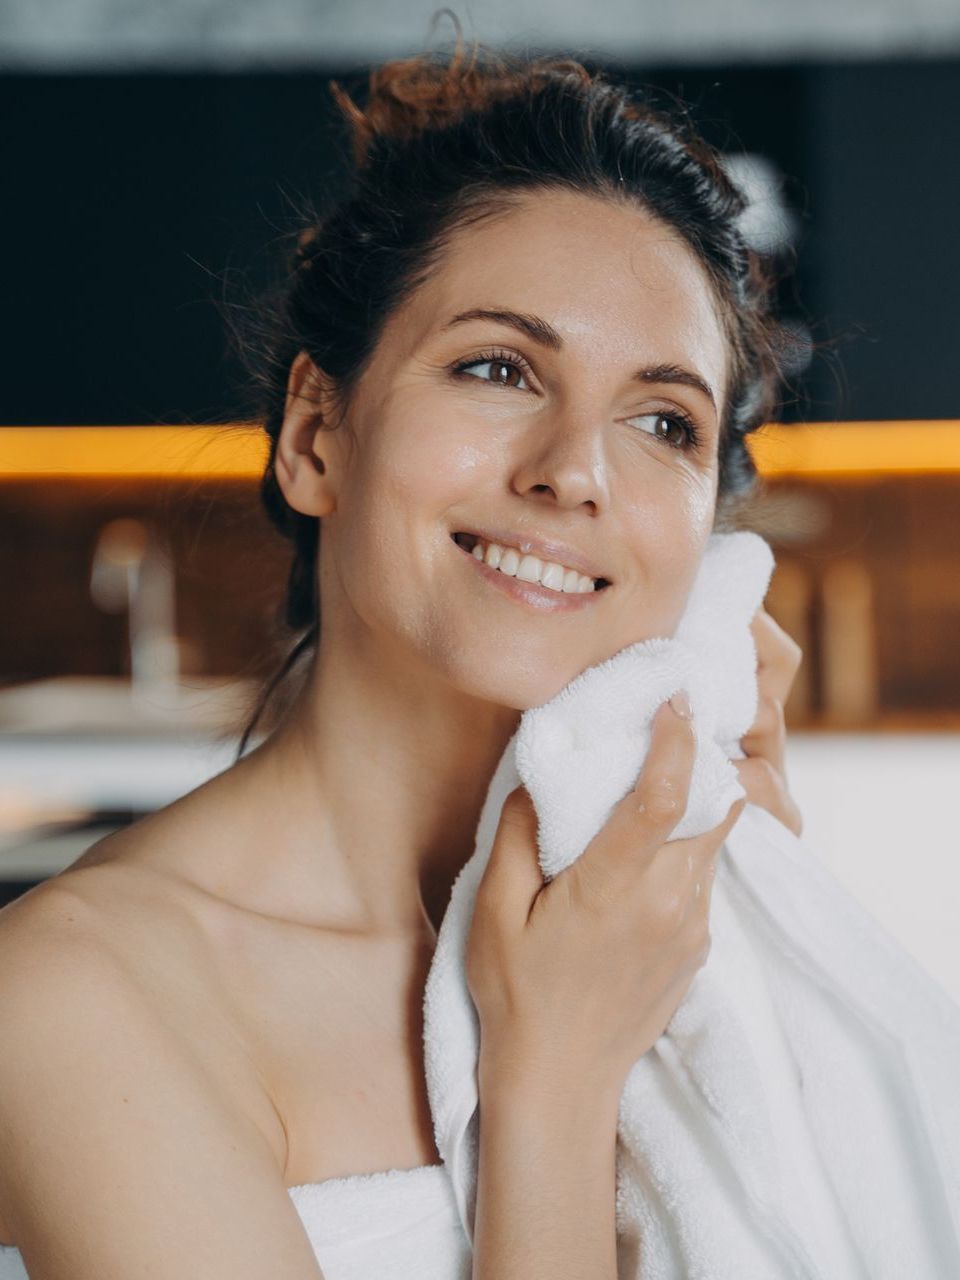 a woman is wrapped in a towel and smiling while cleaning her face with a towel .